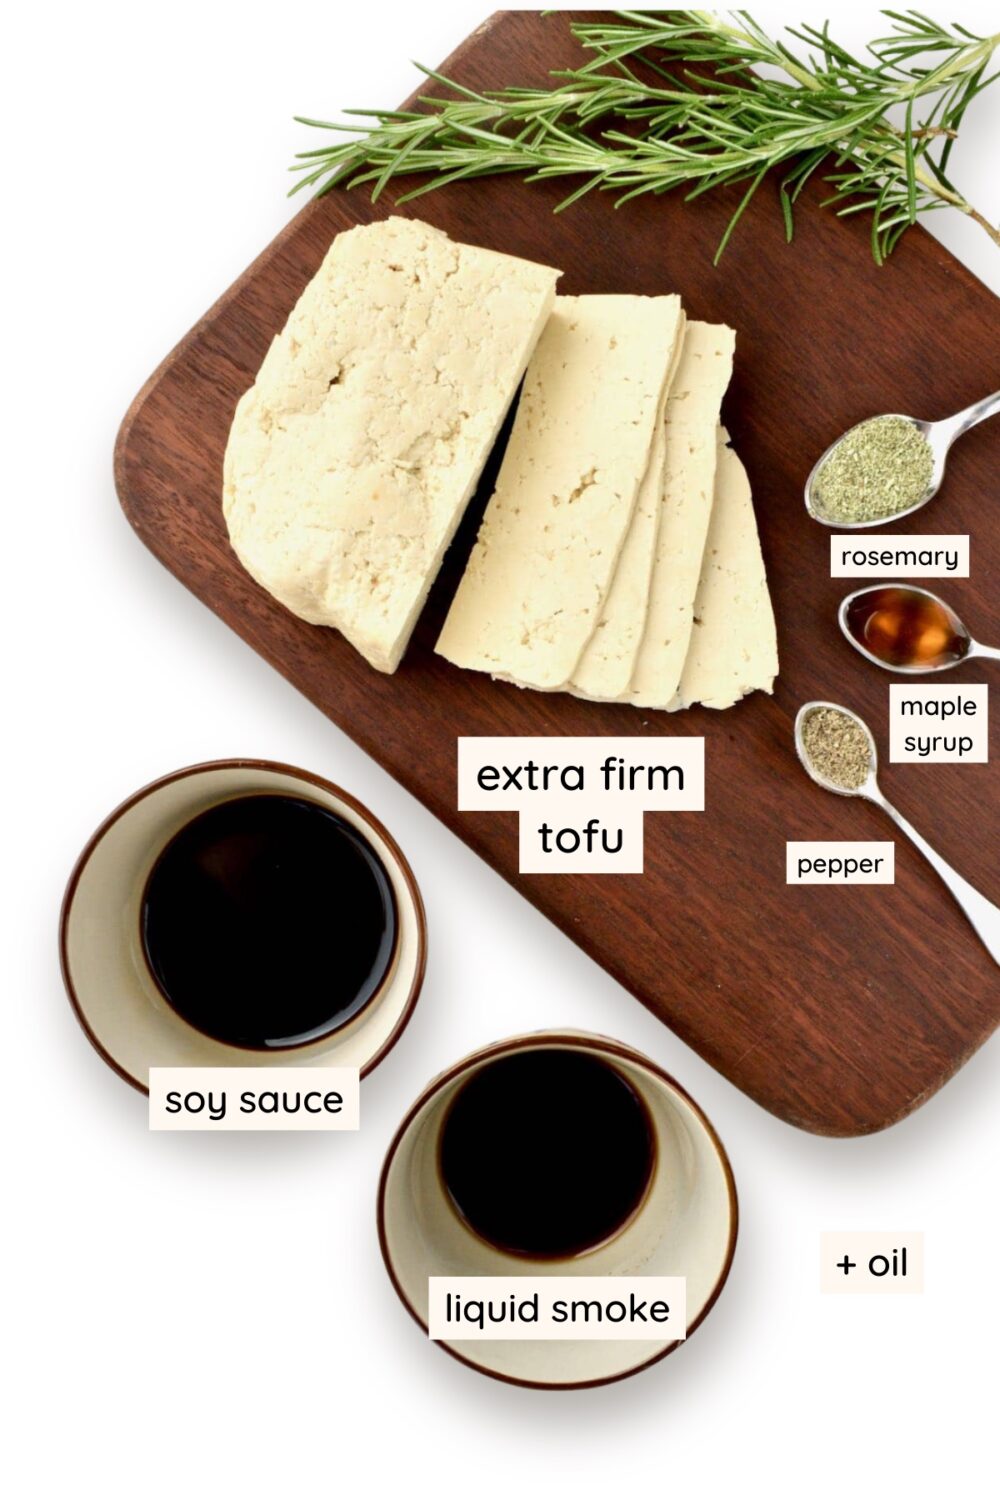 Tofu slices on a dark wooden board, ground rosemary, maple syrup and black pepper on small measuring spoons, and soy sauce and liquid smoke in small pots.